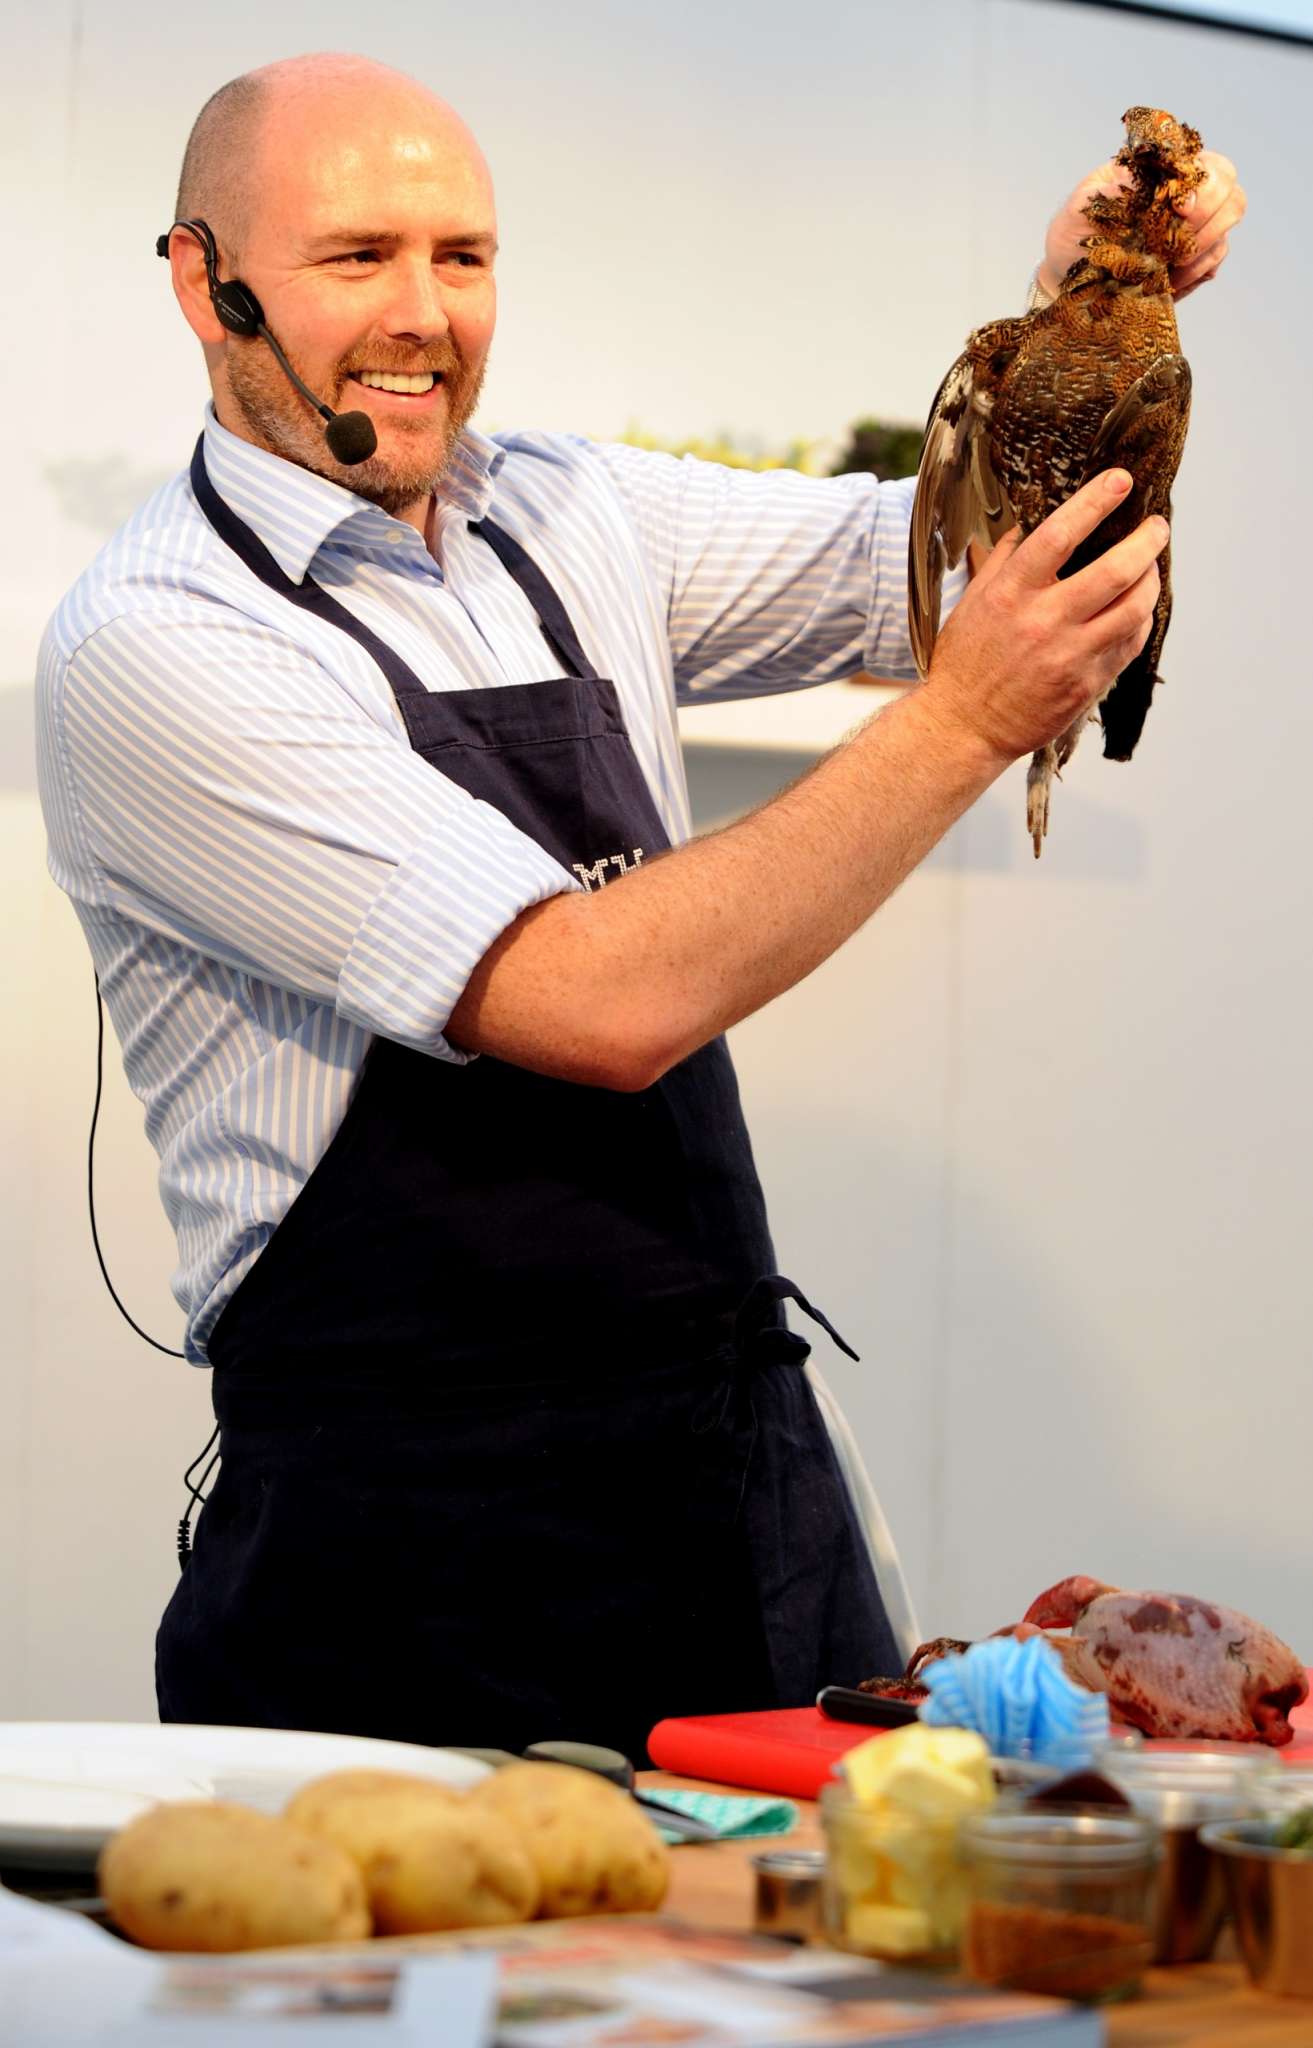 The annual Bolton Food and Drink festival drew in a large crowd this Sunday where revellers soaked up the atmosphere. Star attractions on the day were chefs John Torode of Masterchef fame and Aiden Byrne from the Manchester House restaurant. Chef Aiden Byrne gives a demo on how to cook Grouse. Picture by Paul Heyes, Sunday August 24, 2014.